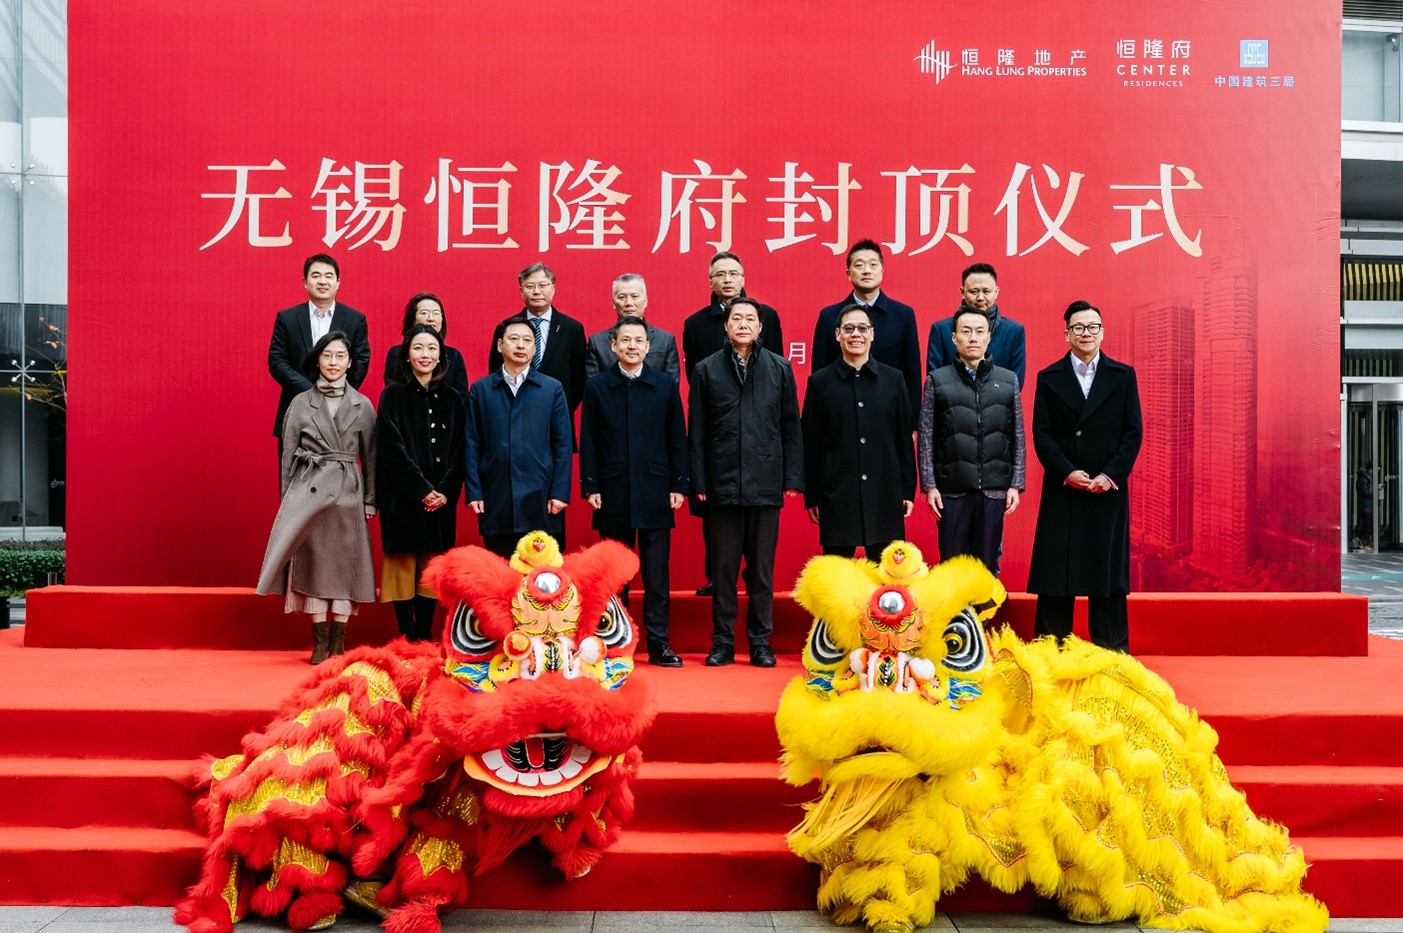 (First row) Mr. Louis Tong, Deputy Director  Project Management (4th from the left); Mr. Tsz Chuen Cheng, Deputy General Manager  Project Management (3rd from the right); Ms. Doris Poon, Deputy General Manager  Center 66 in Wuxi (2nd from the left); Mr. Zi Chuan Zhou, Deputy Secretary of Liangxi District in Wuxi and District Mayor (4th from the right); Mr. Da Yan Xia, Executive Deputy Director of East China Sub-bureau of China Construction Third Engineering Bureau (3rd from the left) and (Second row) Mr. Guo Ning Liu, Secretary of the Party Committee and General Manager of China Construction Third Engineering Bureau Group (East China) (1st from the left), officiate the topping out ceremony of Center Residences in Wuxi